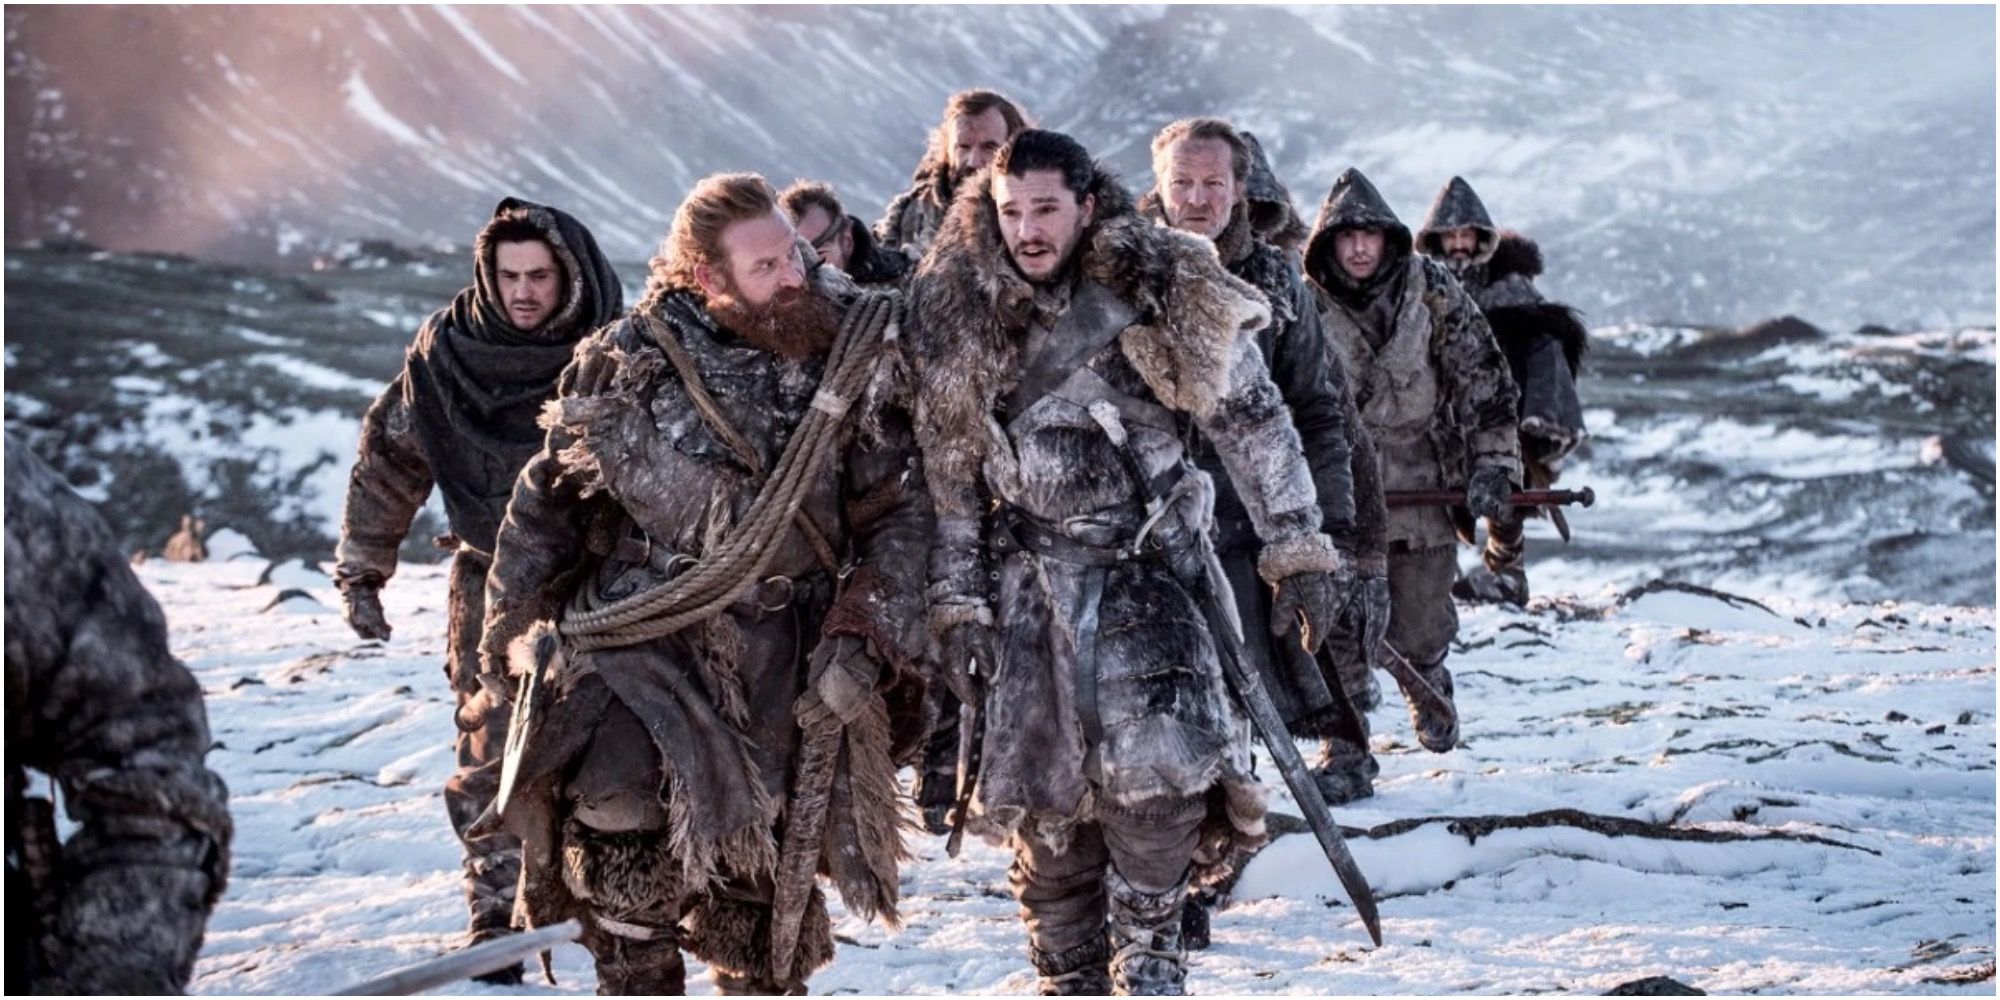 Game of Thrones Locations Beyond The Wall Westoros John Snow and The NightWatch 